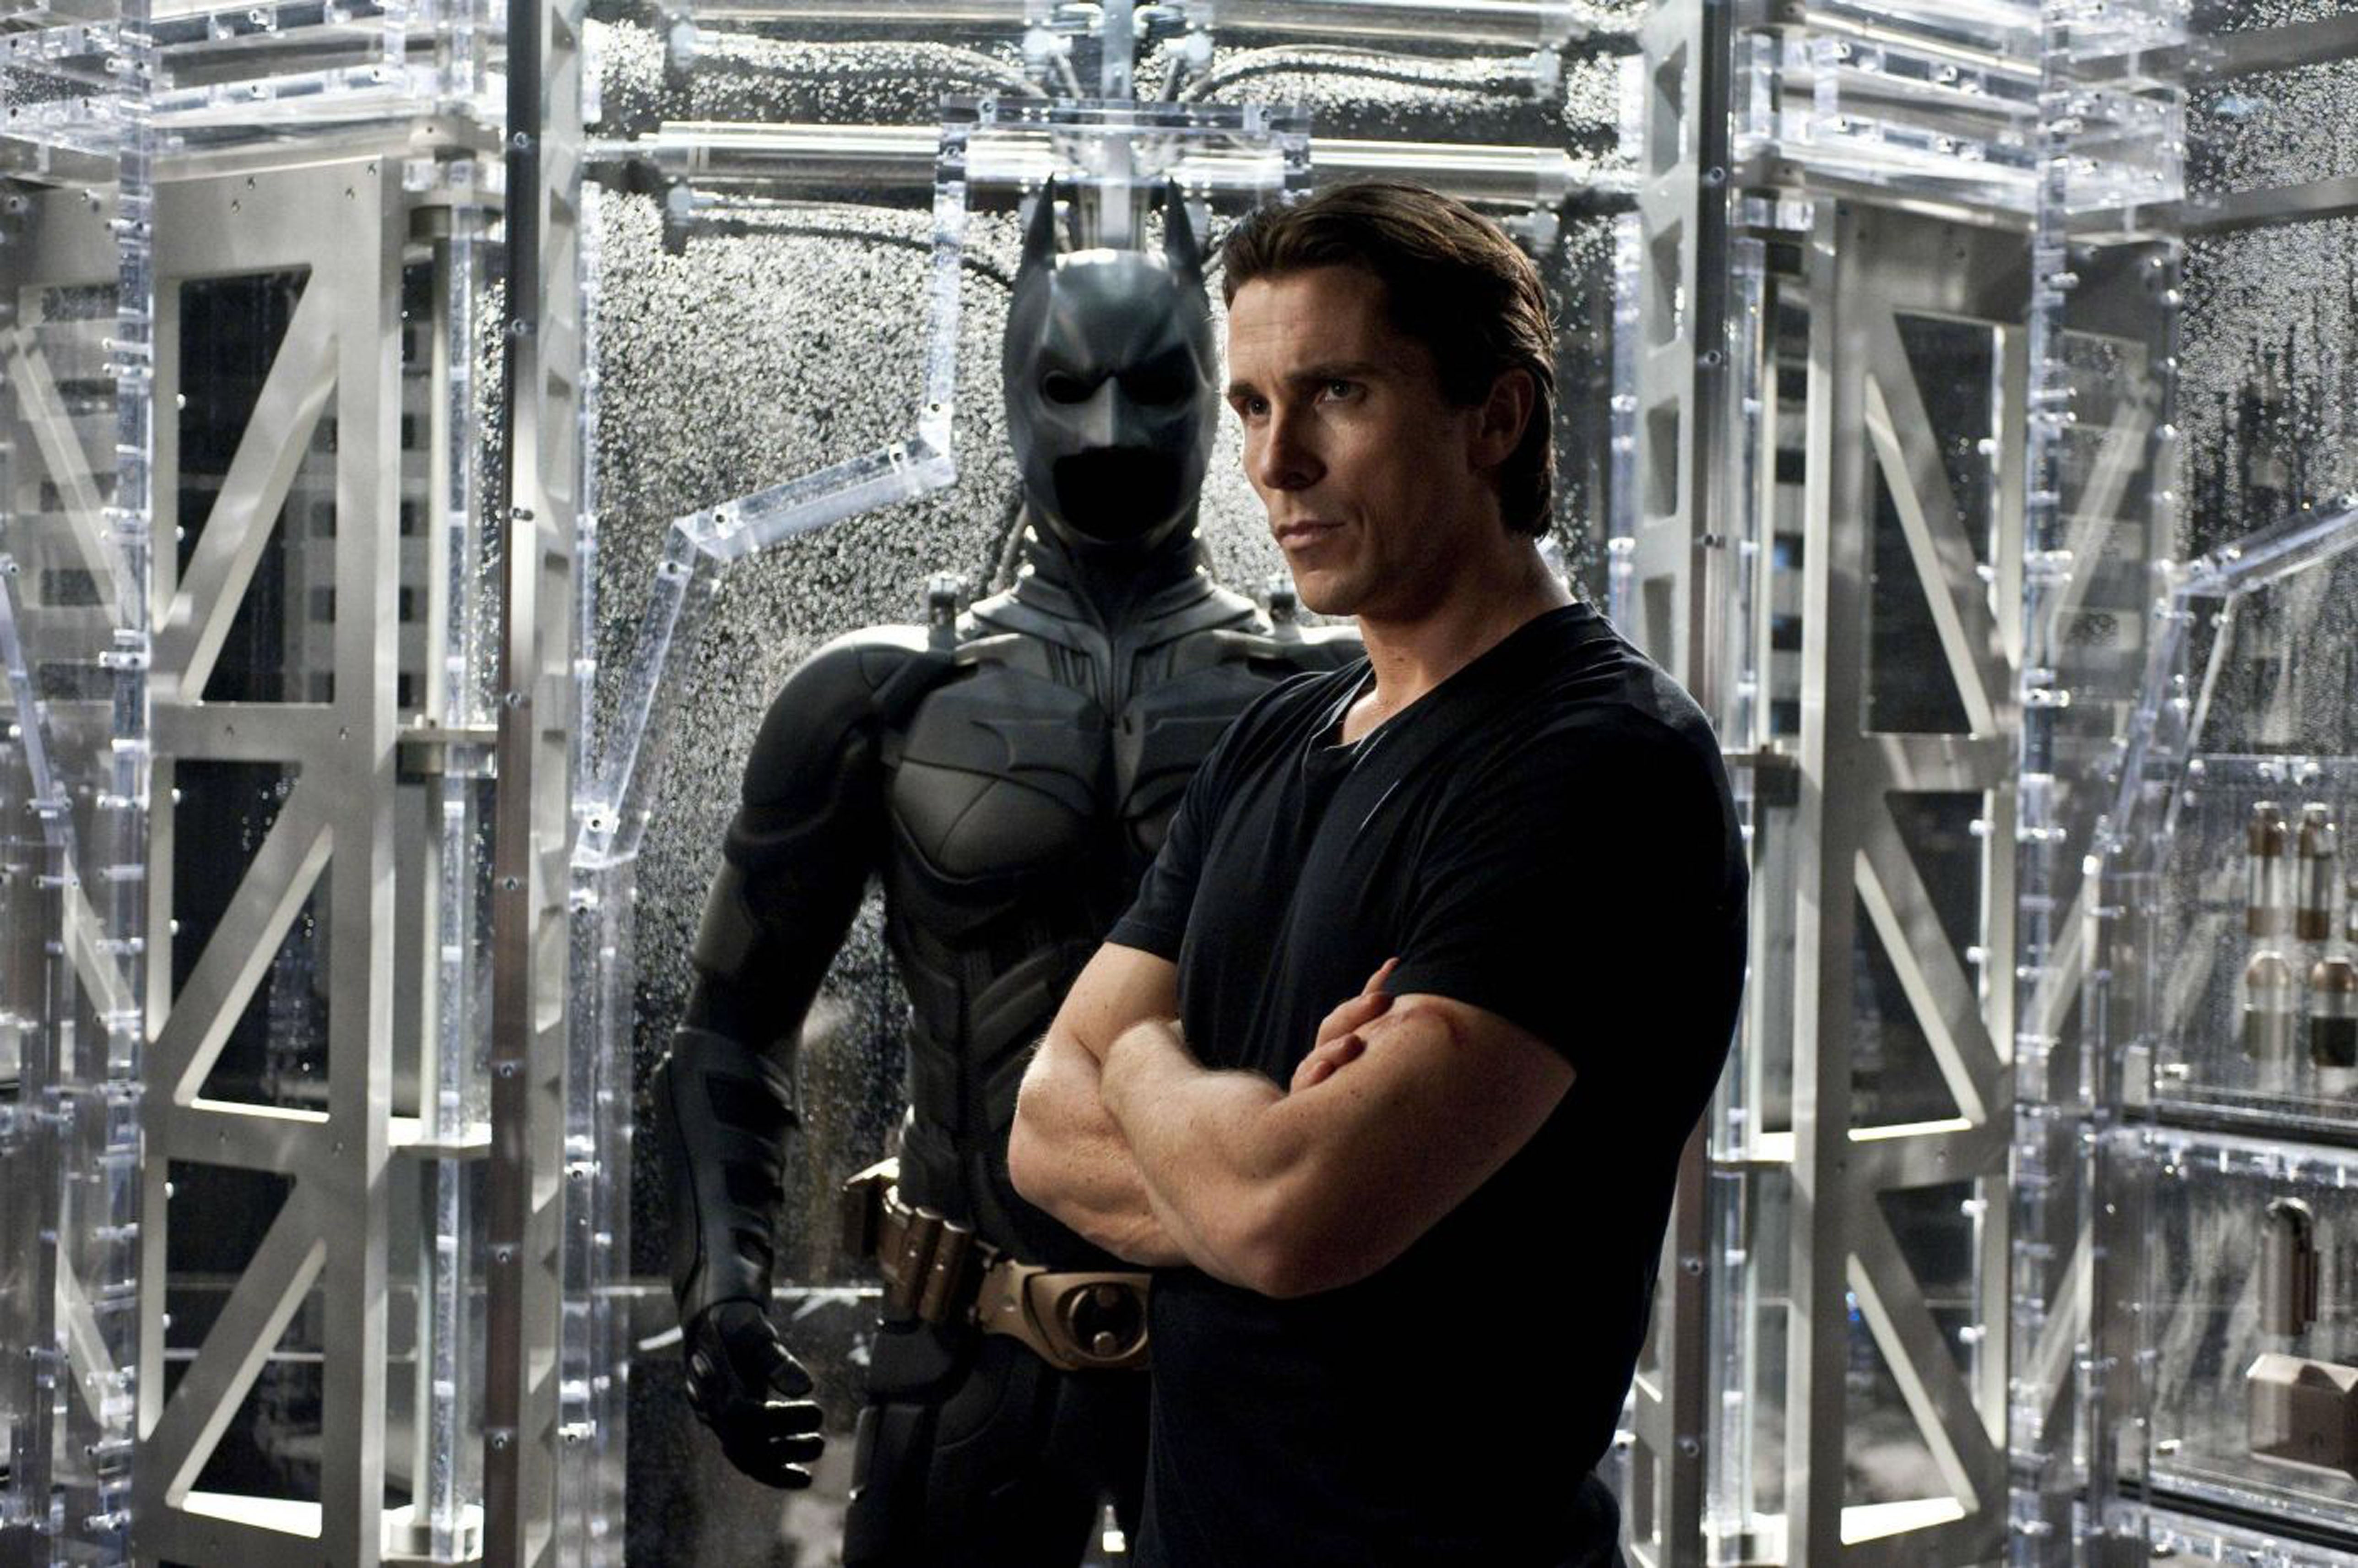 The most critically acclaimed version of Batman on screen has to be Christian Bale’s portrayal in Christopher Nolan’s trilogy